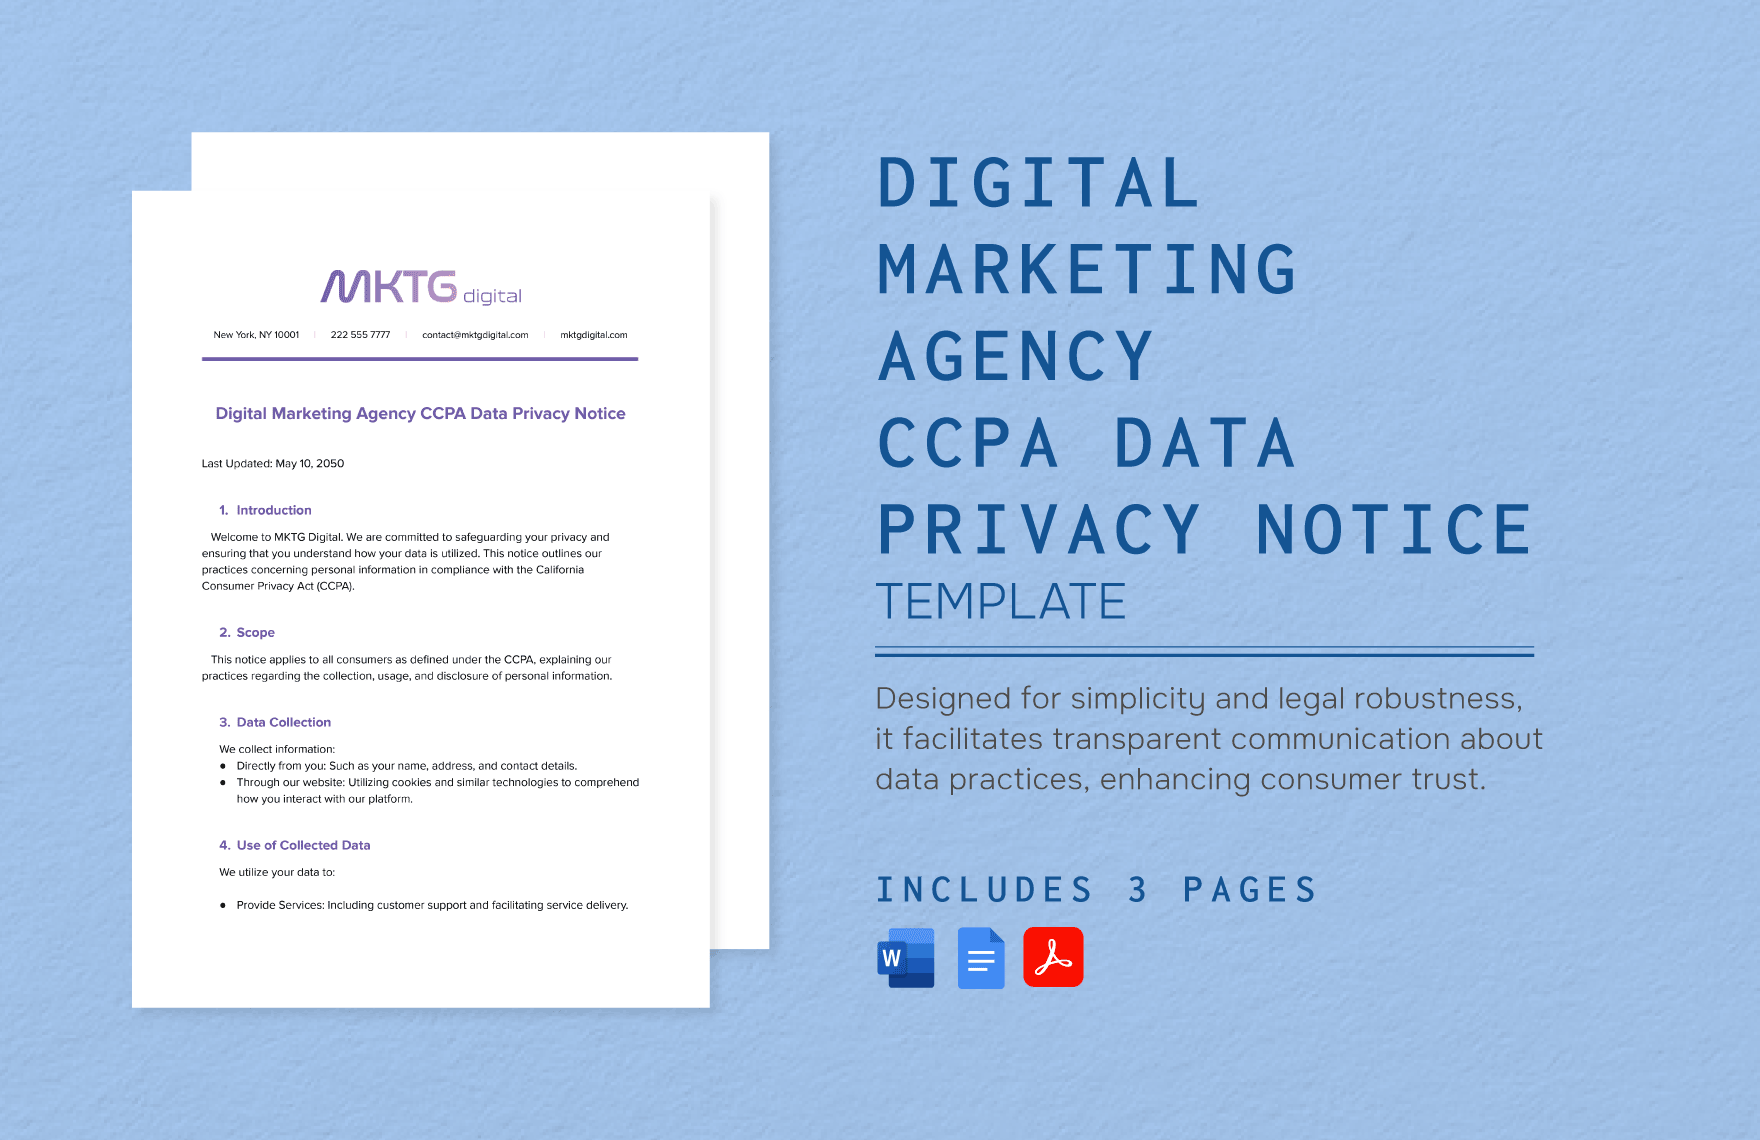 Digital Marketing Agency CCPA Data Privacy Notice Template in Word, Google Docs, PDF